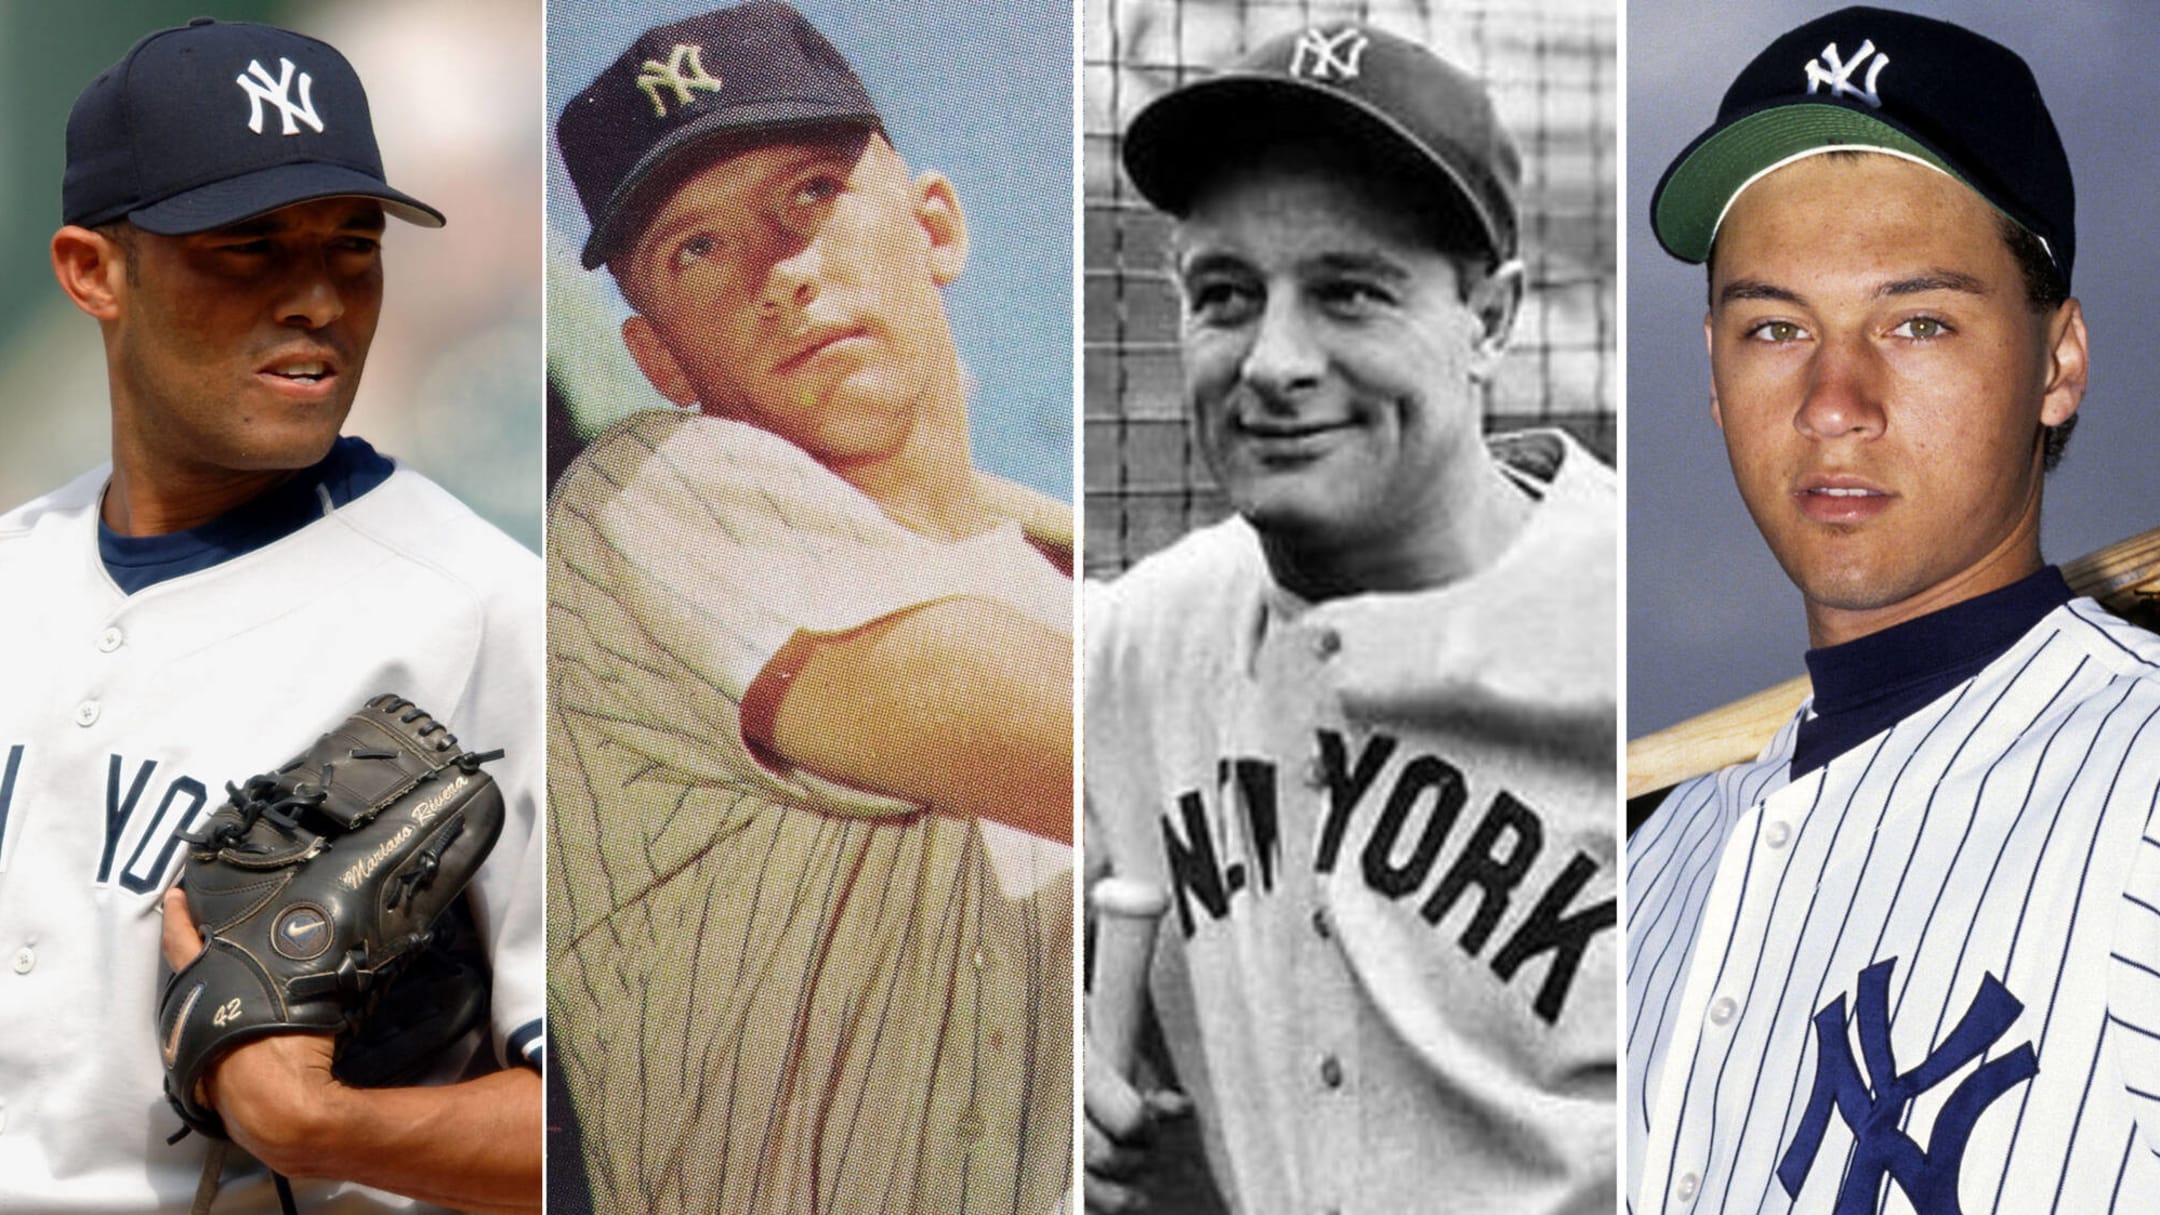 Who Are The New York Yankees? A Legacy of Excellence and Tradition